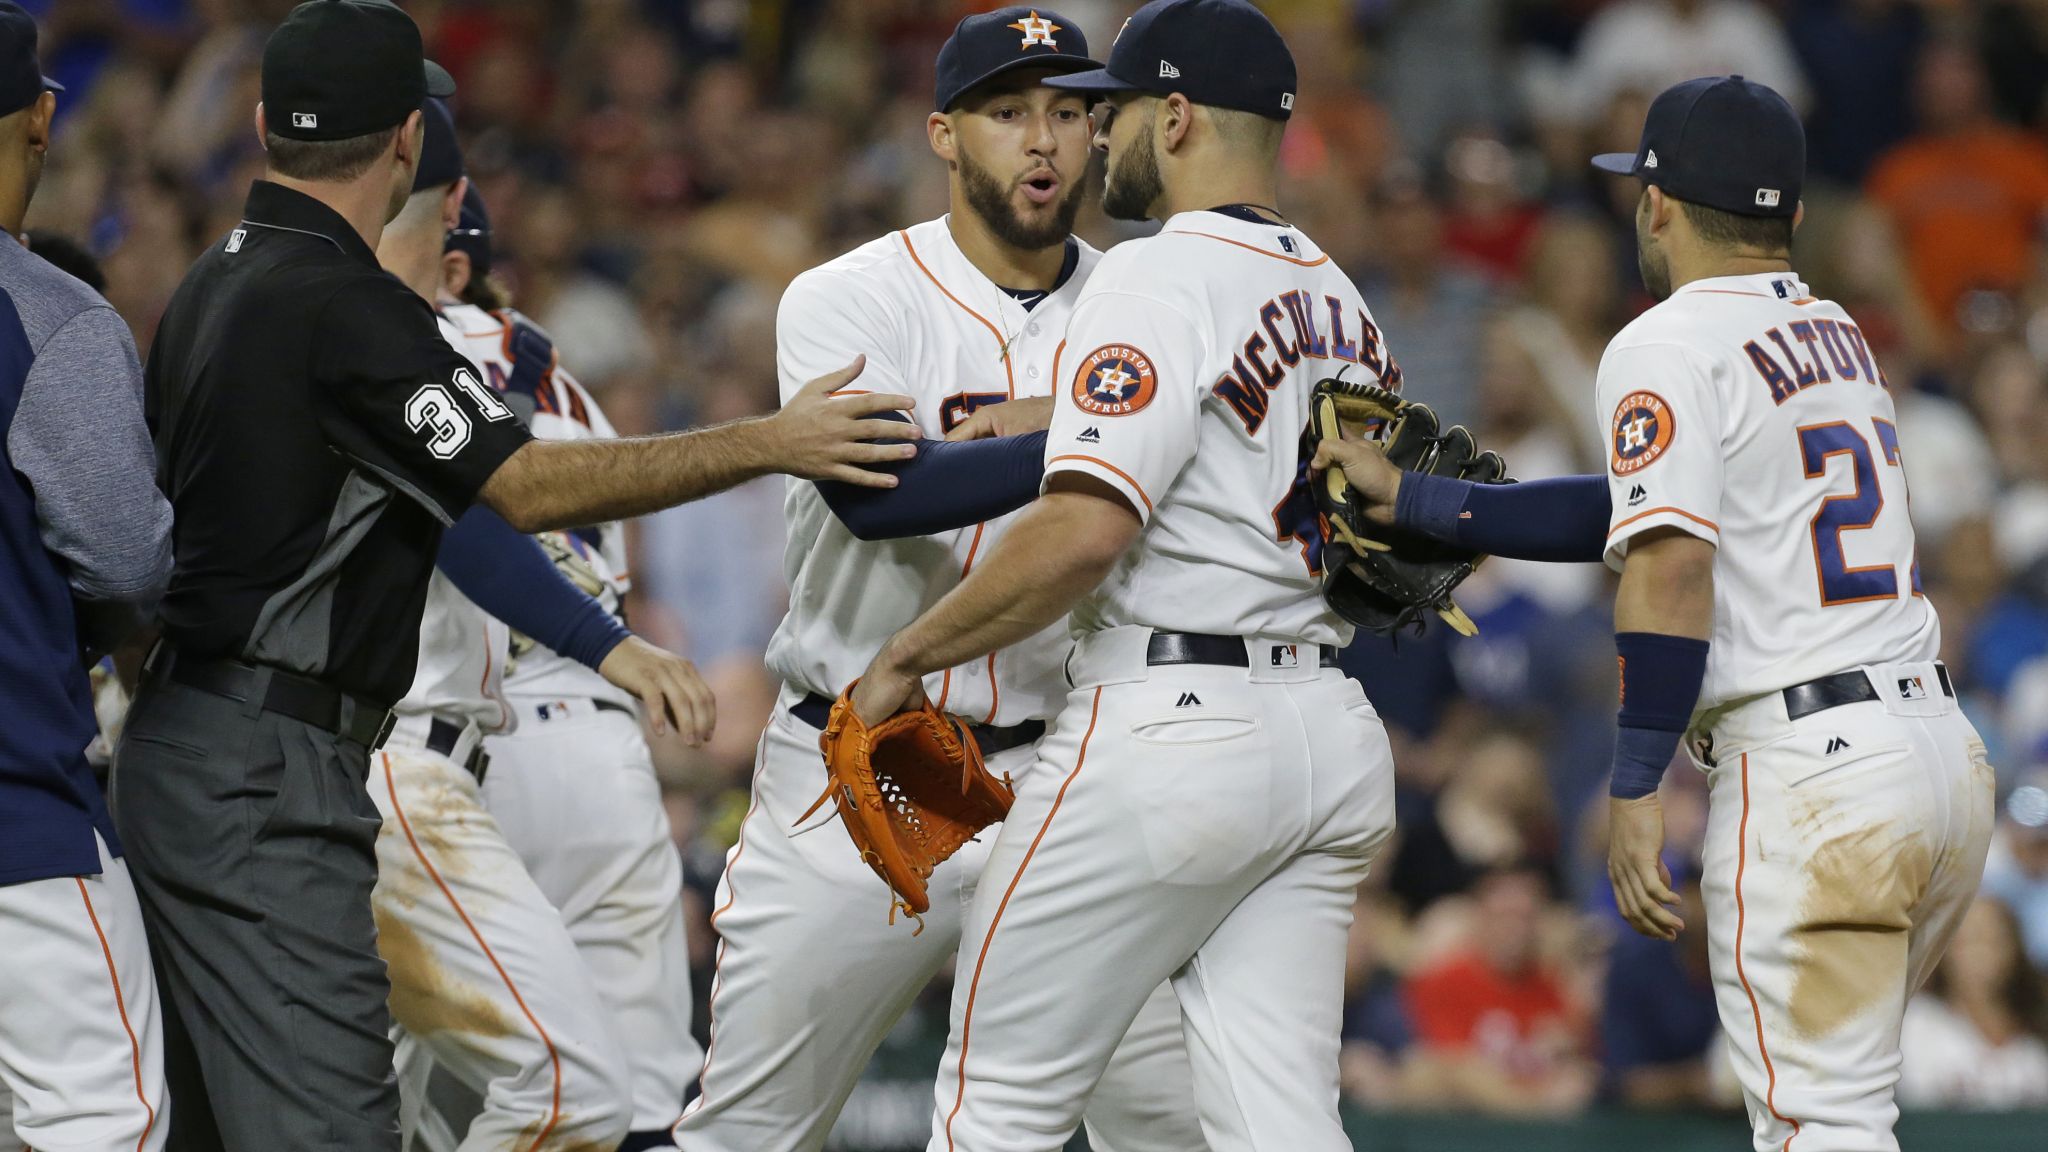 When Carlos Correa clapped back in style after Houston Astros